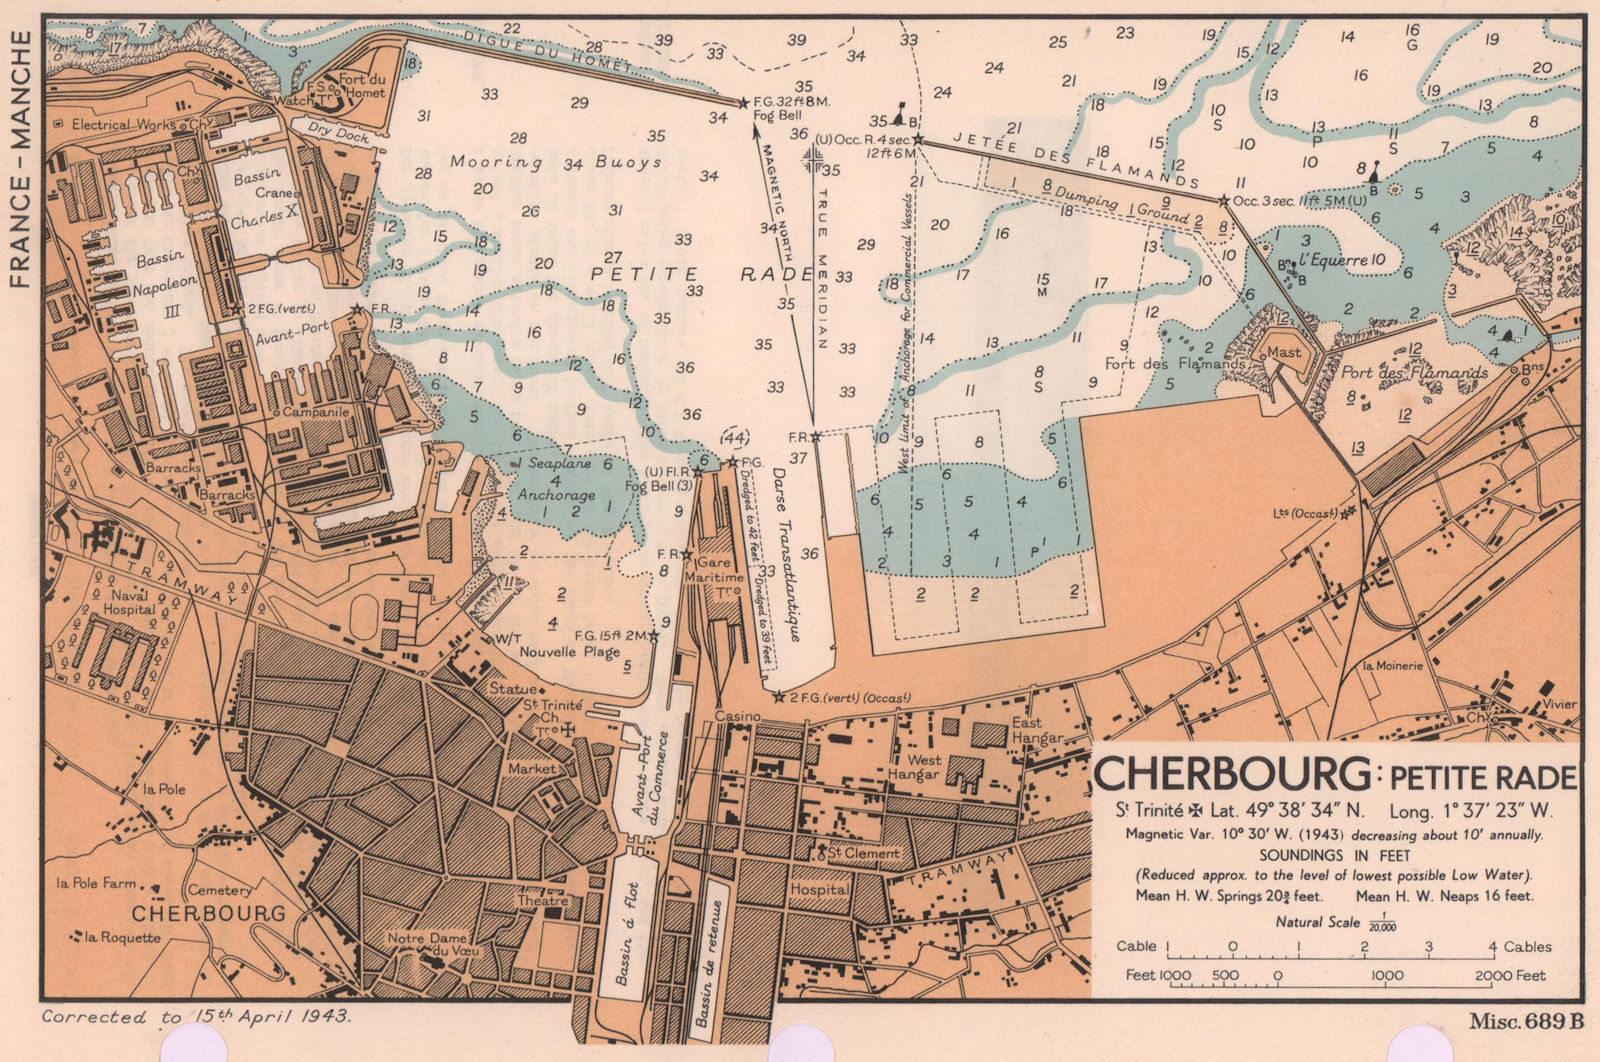 Cherbourg Petite Rade town plan & sea chart. D-Day planning map. ADMIRALTY 1943